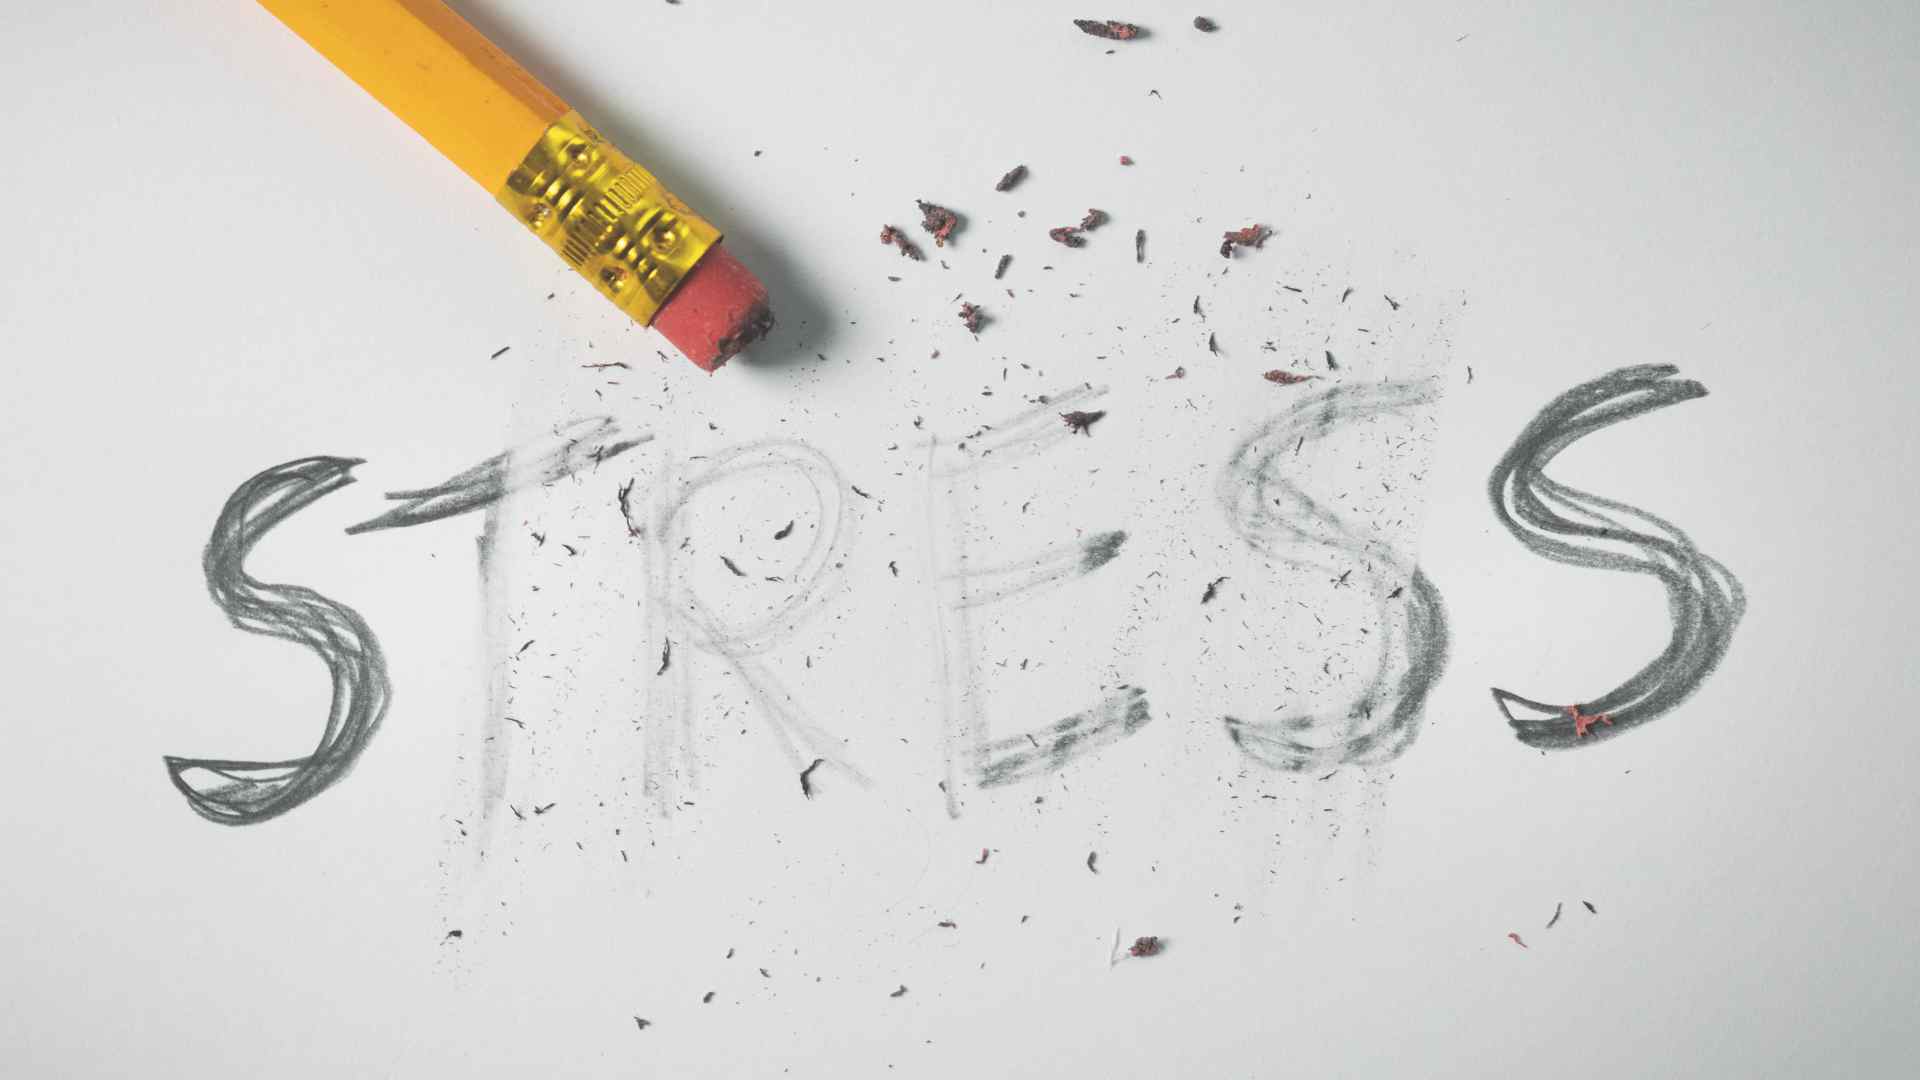 The word stress written in scribbled pencil, half rubbed out